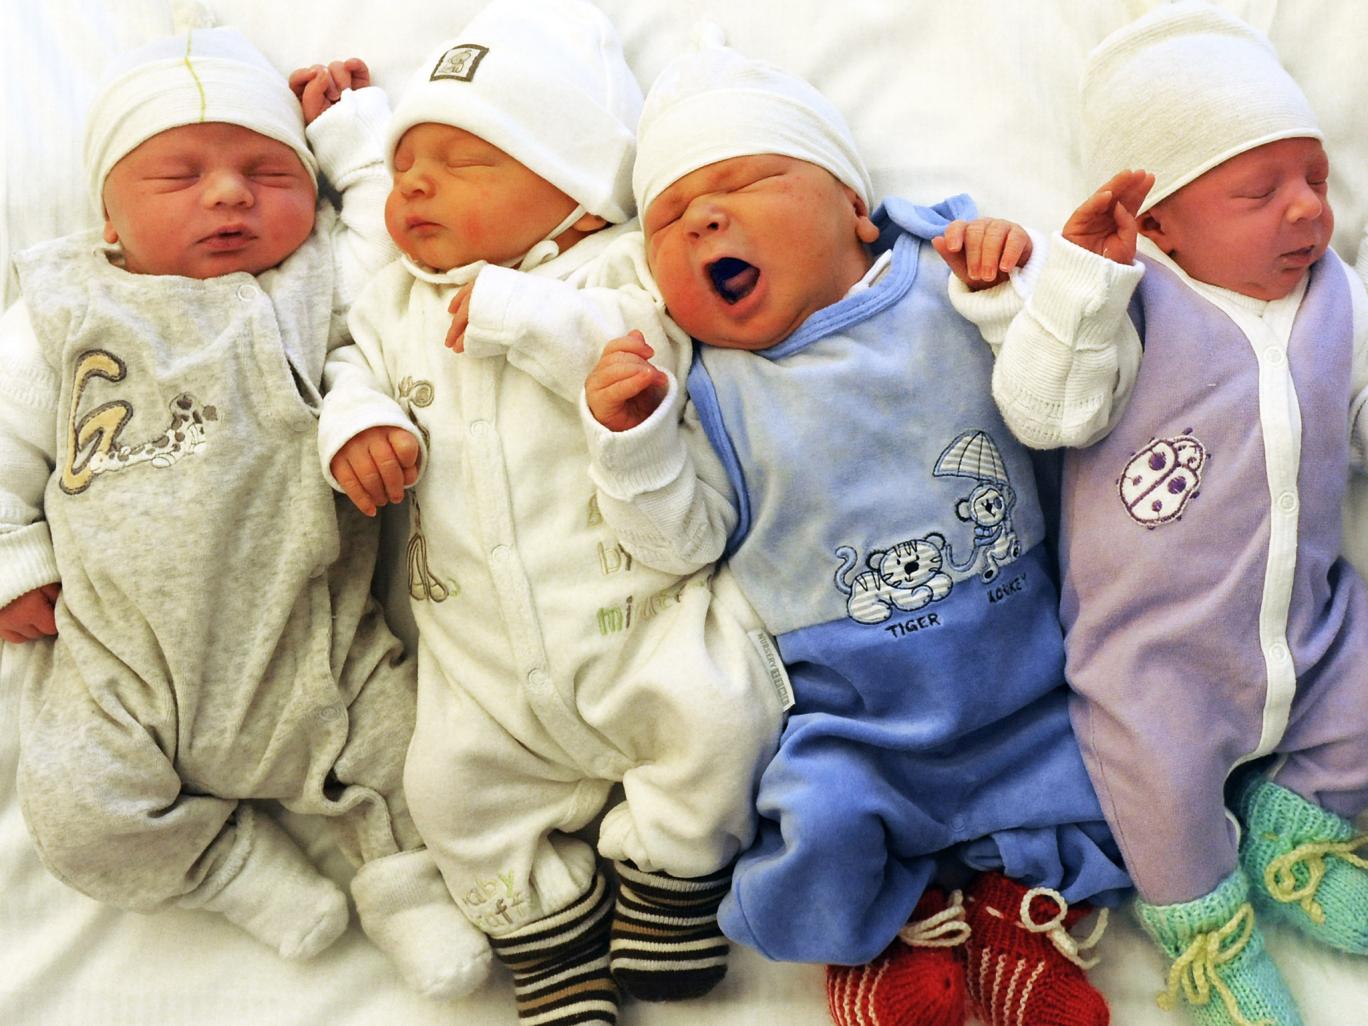 The ONS has released its annual list of the most popular baby names